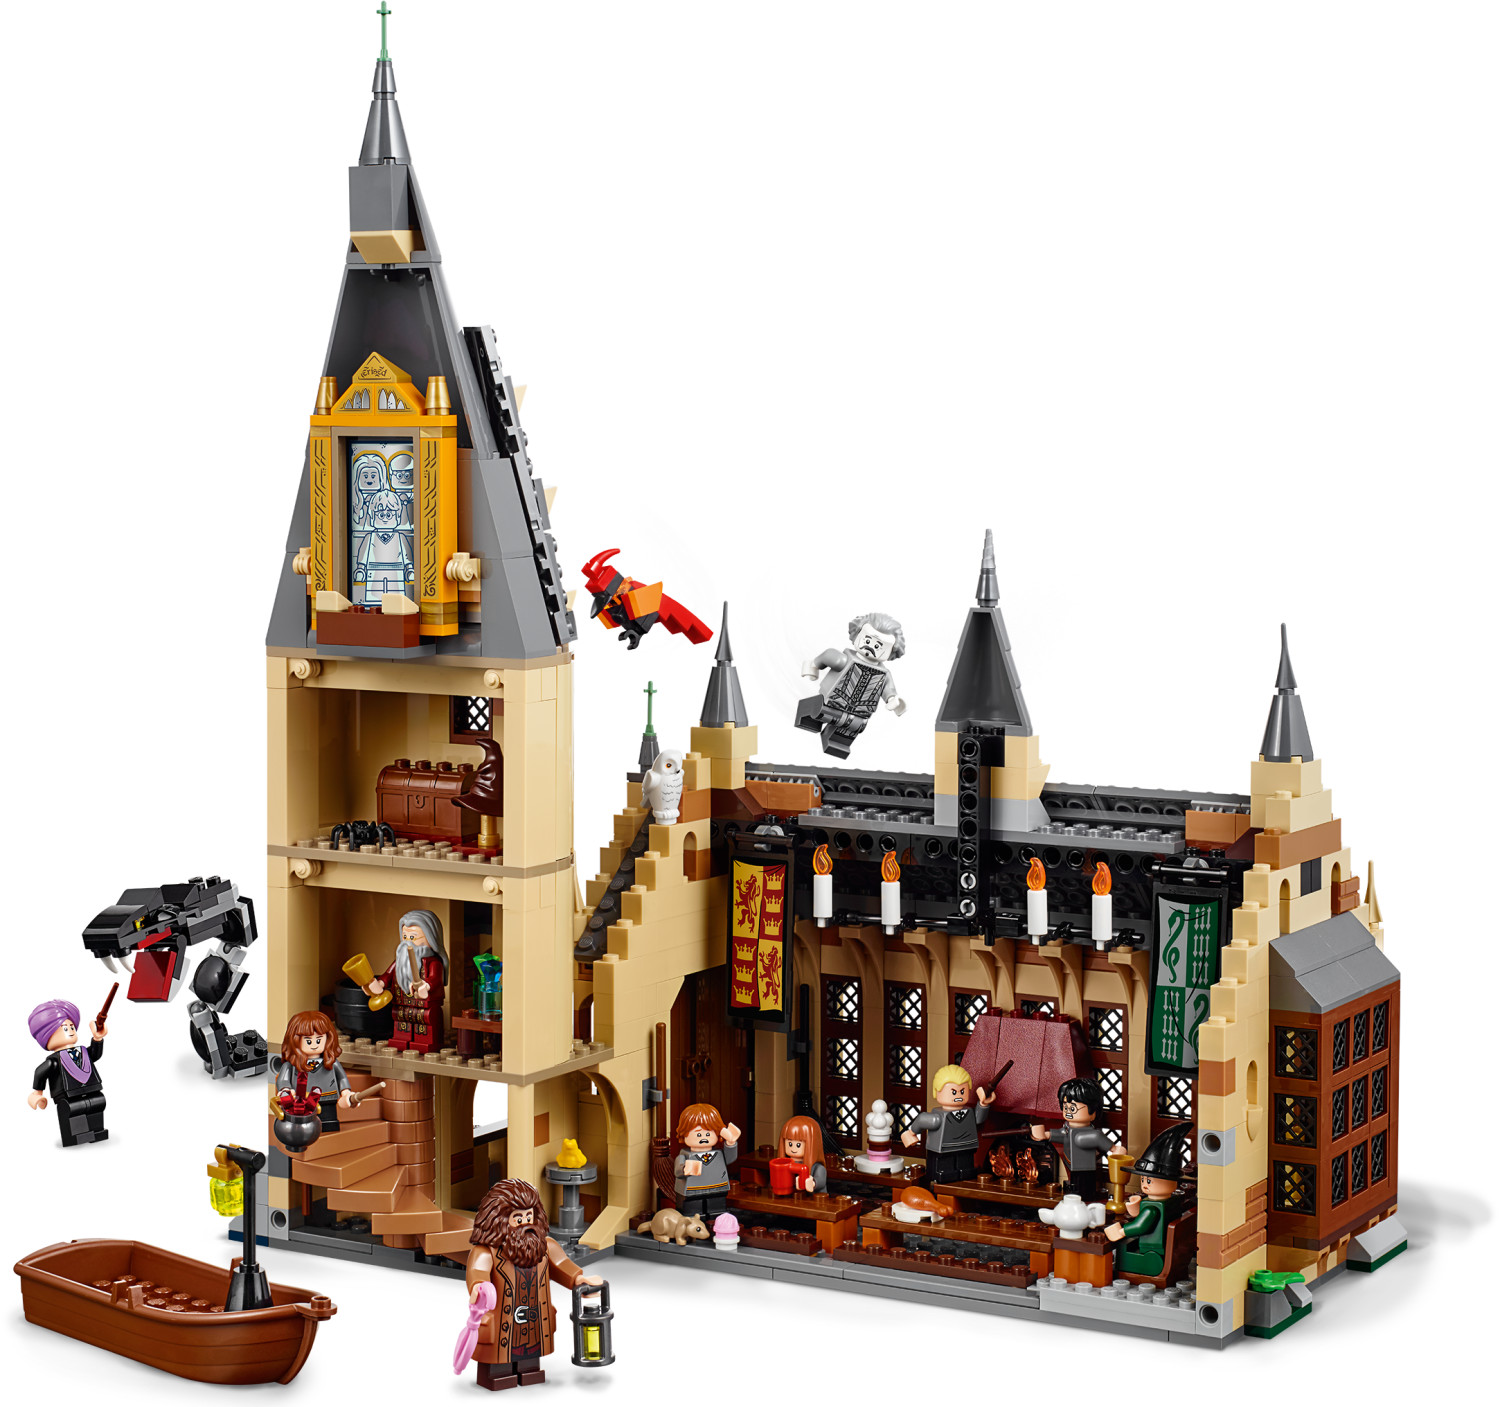 buy-lego-harry-potter-hogwarts-great-hall-75954-from-153-97-today-january-sales-on